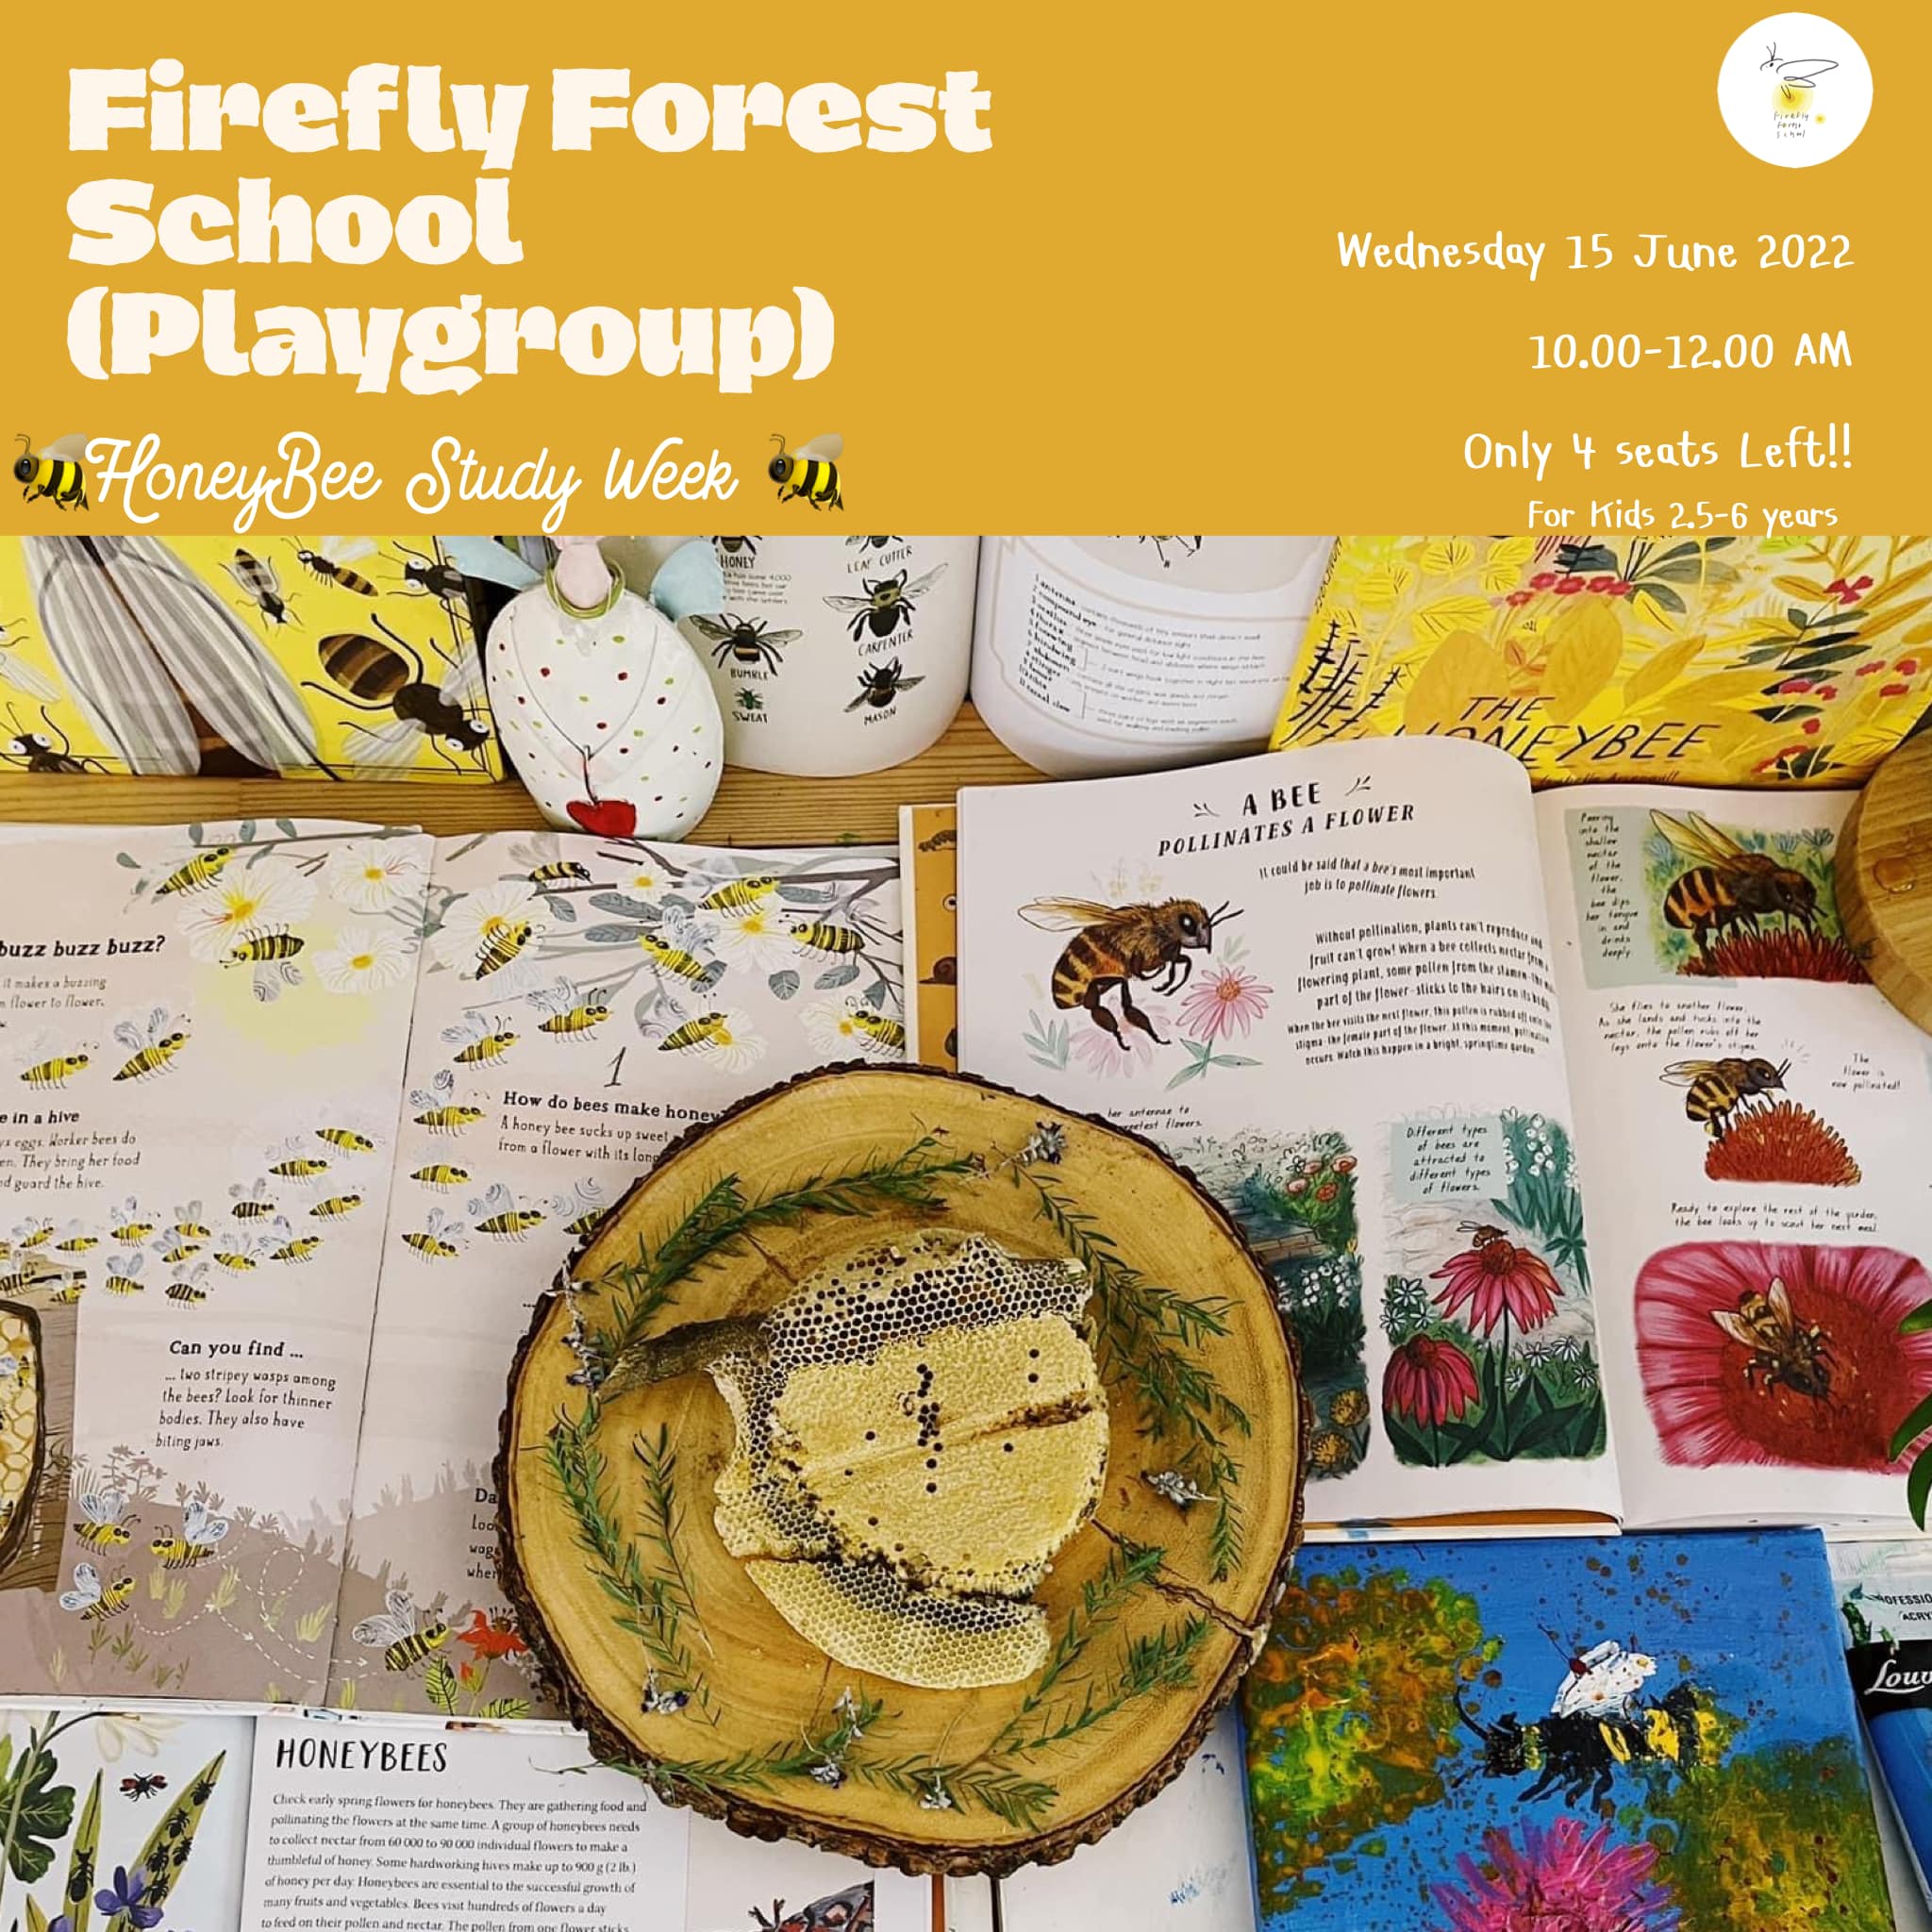 We invite you to join our Nature Classroom.
This week we have “ HoneyBee Study W...